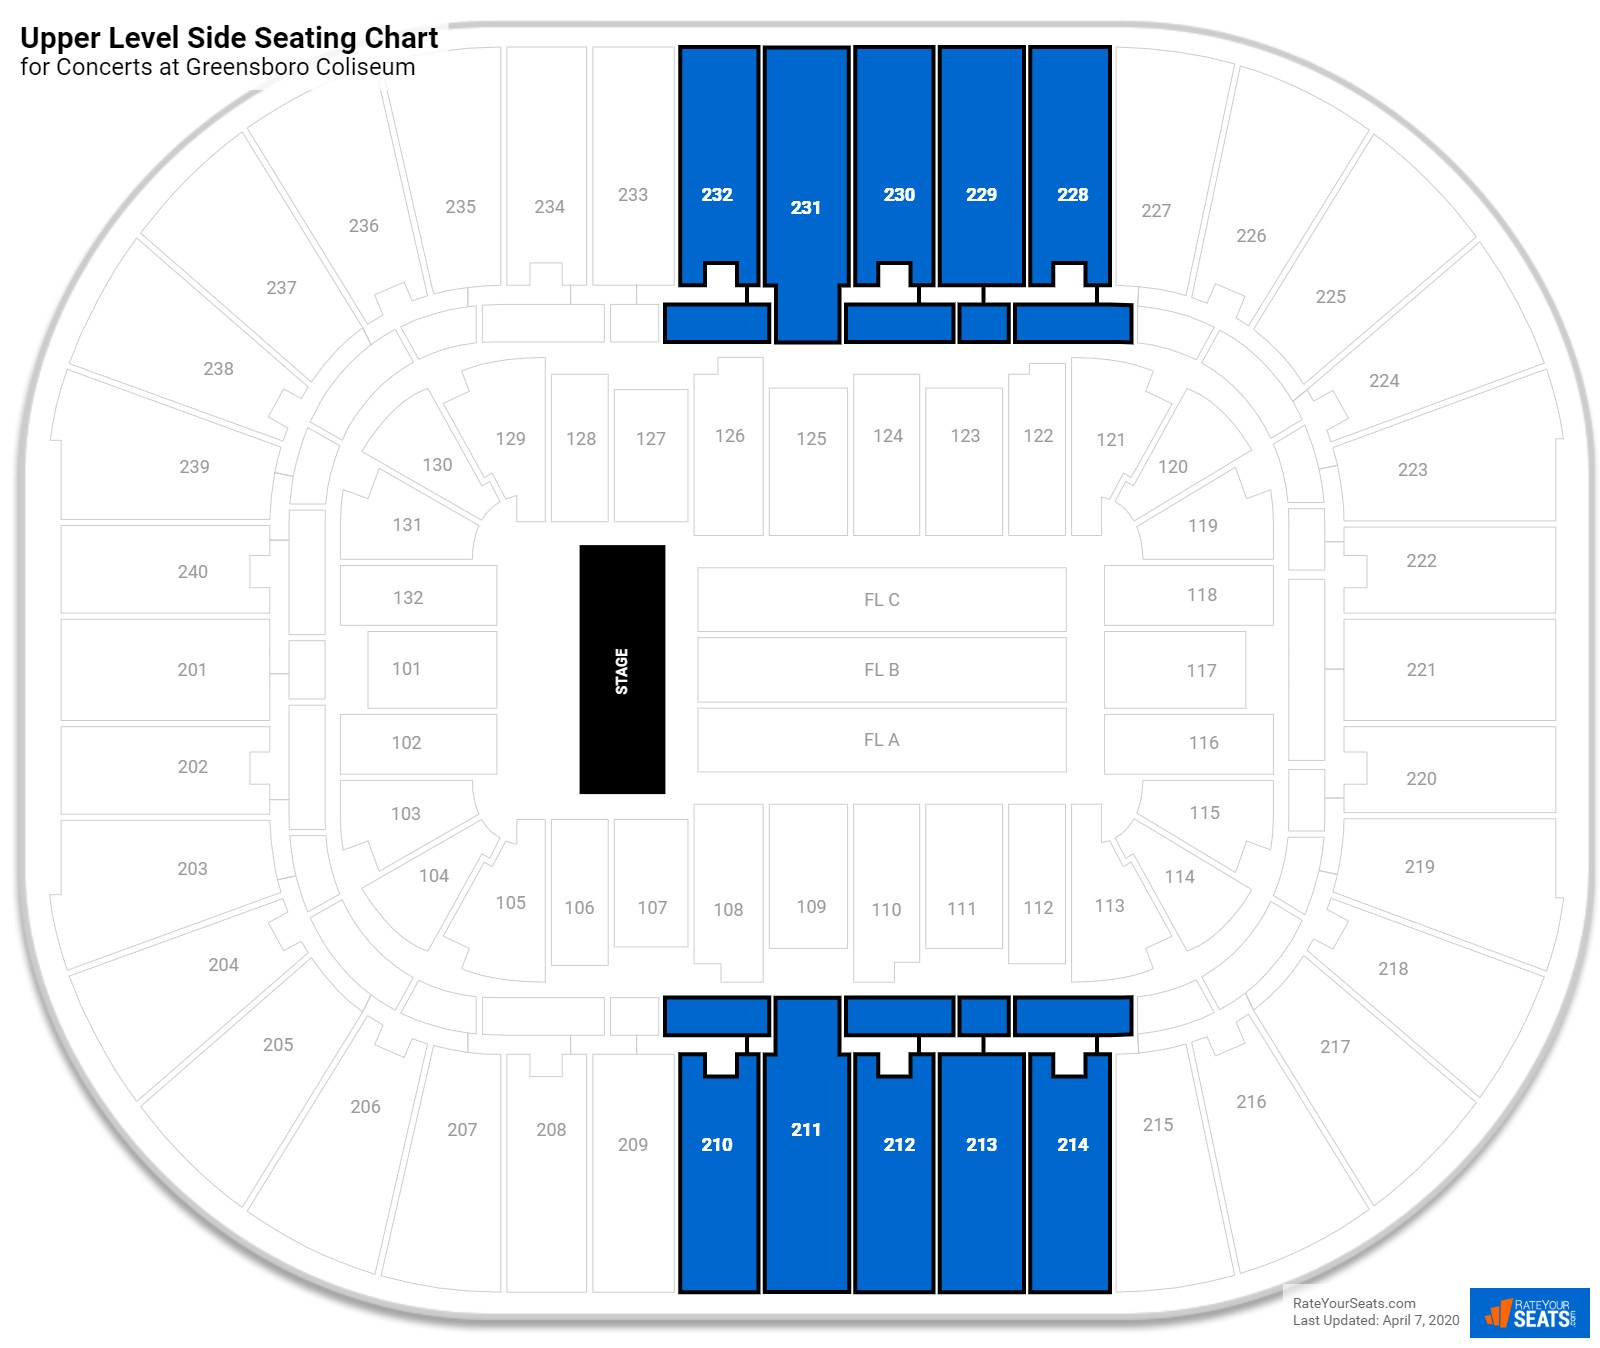 Greensboro Coliseum Seating for Concerts